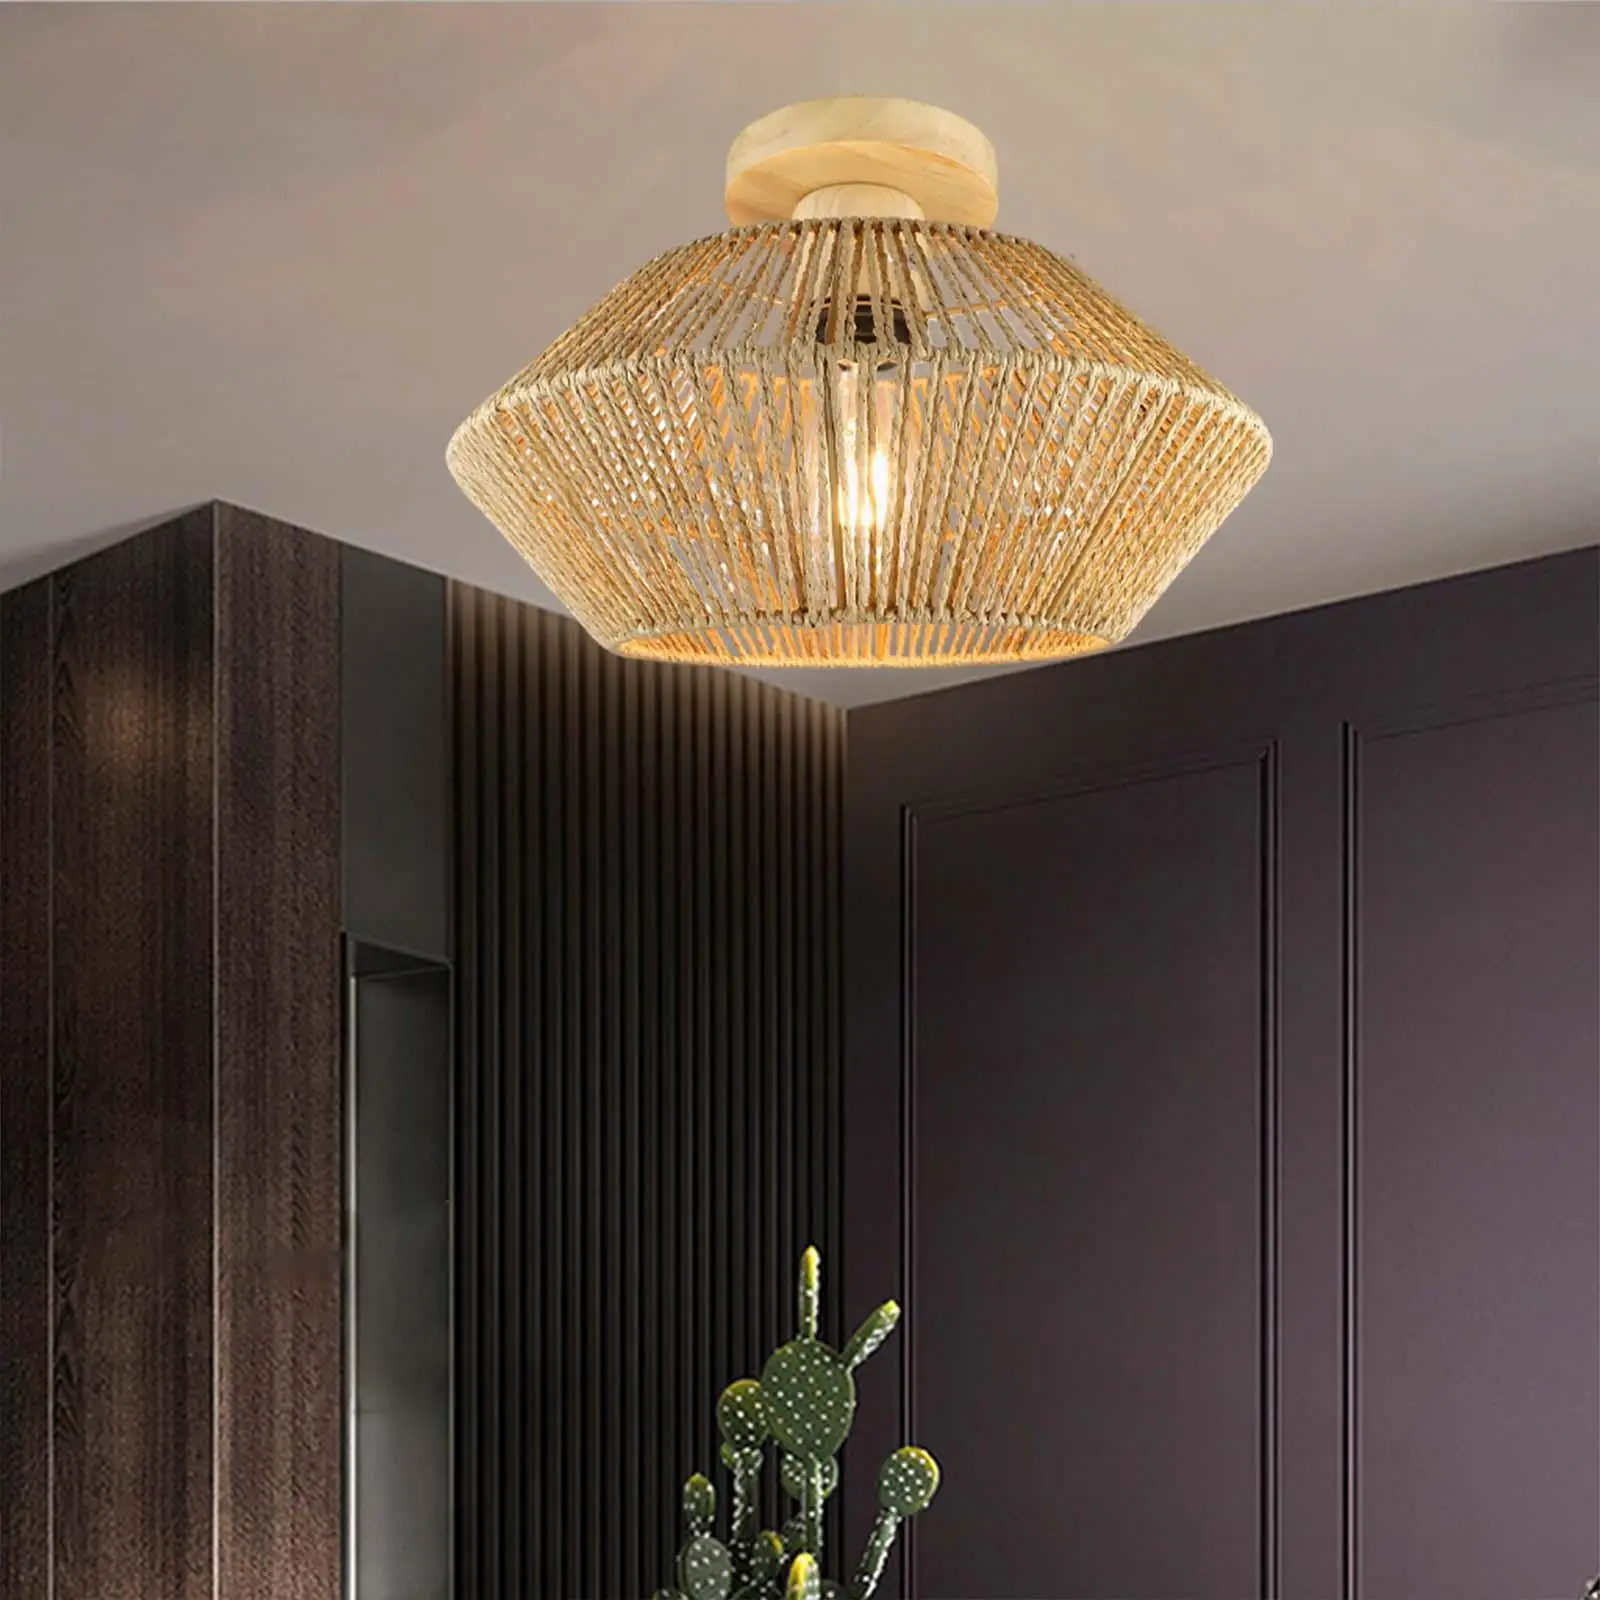 Handwoven LED Ceiling Pendant Light Shade Lighting Fixture Decorative Light Cover for Apartment Living Room Laundry Office Hotel